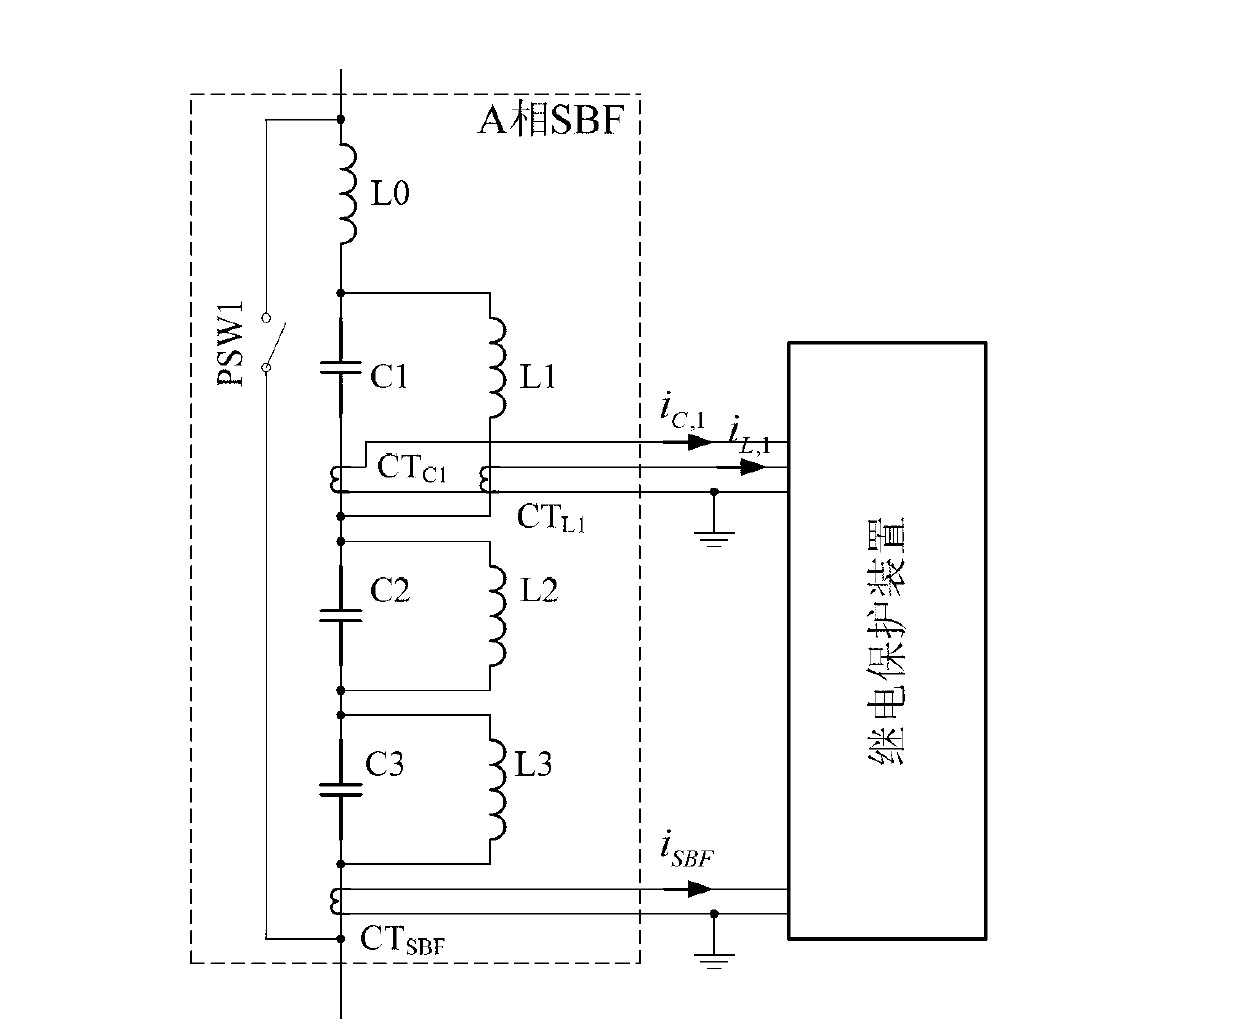 Relay protection method of blocking filter mistermination failure